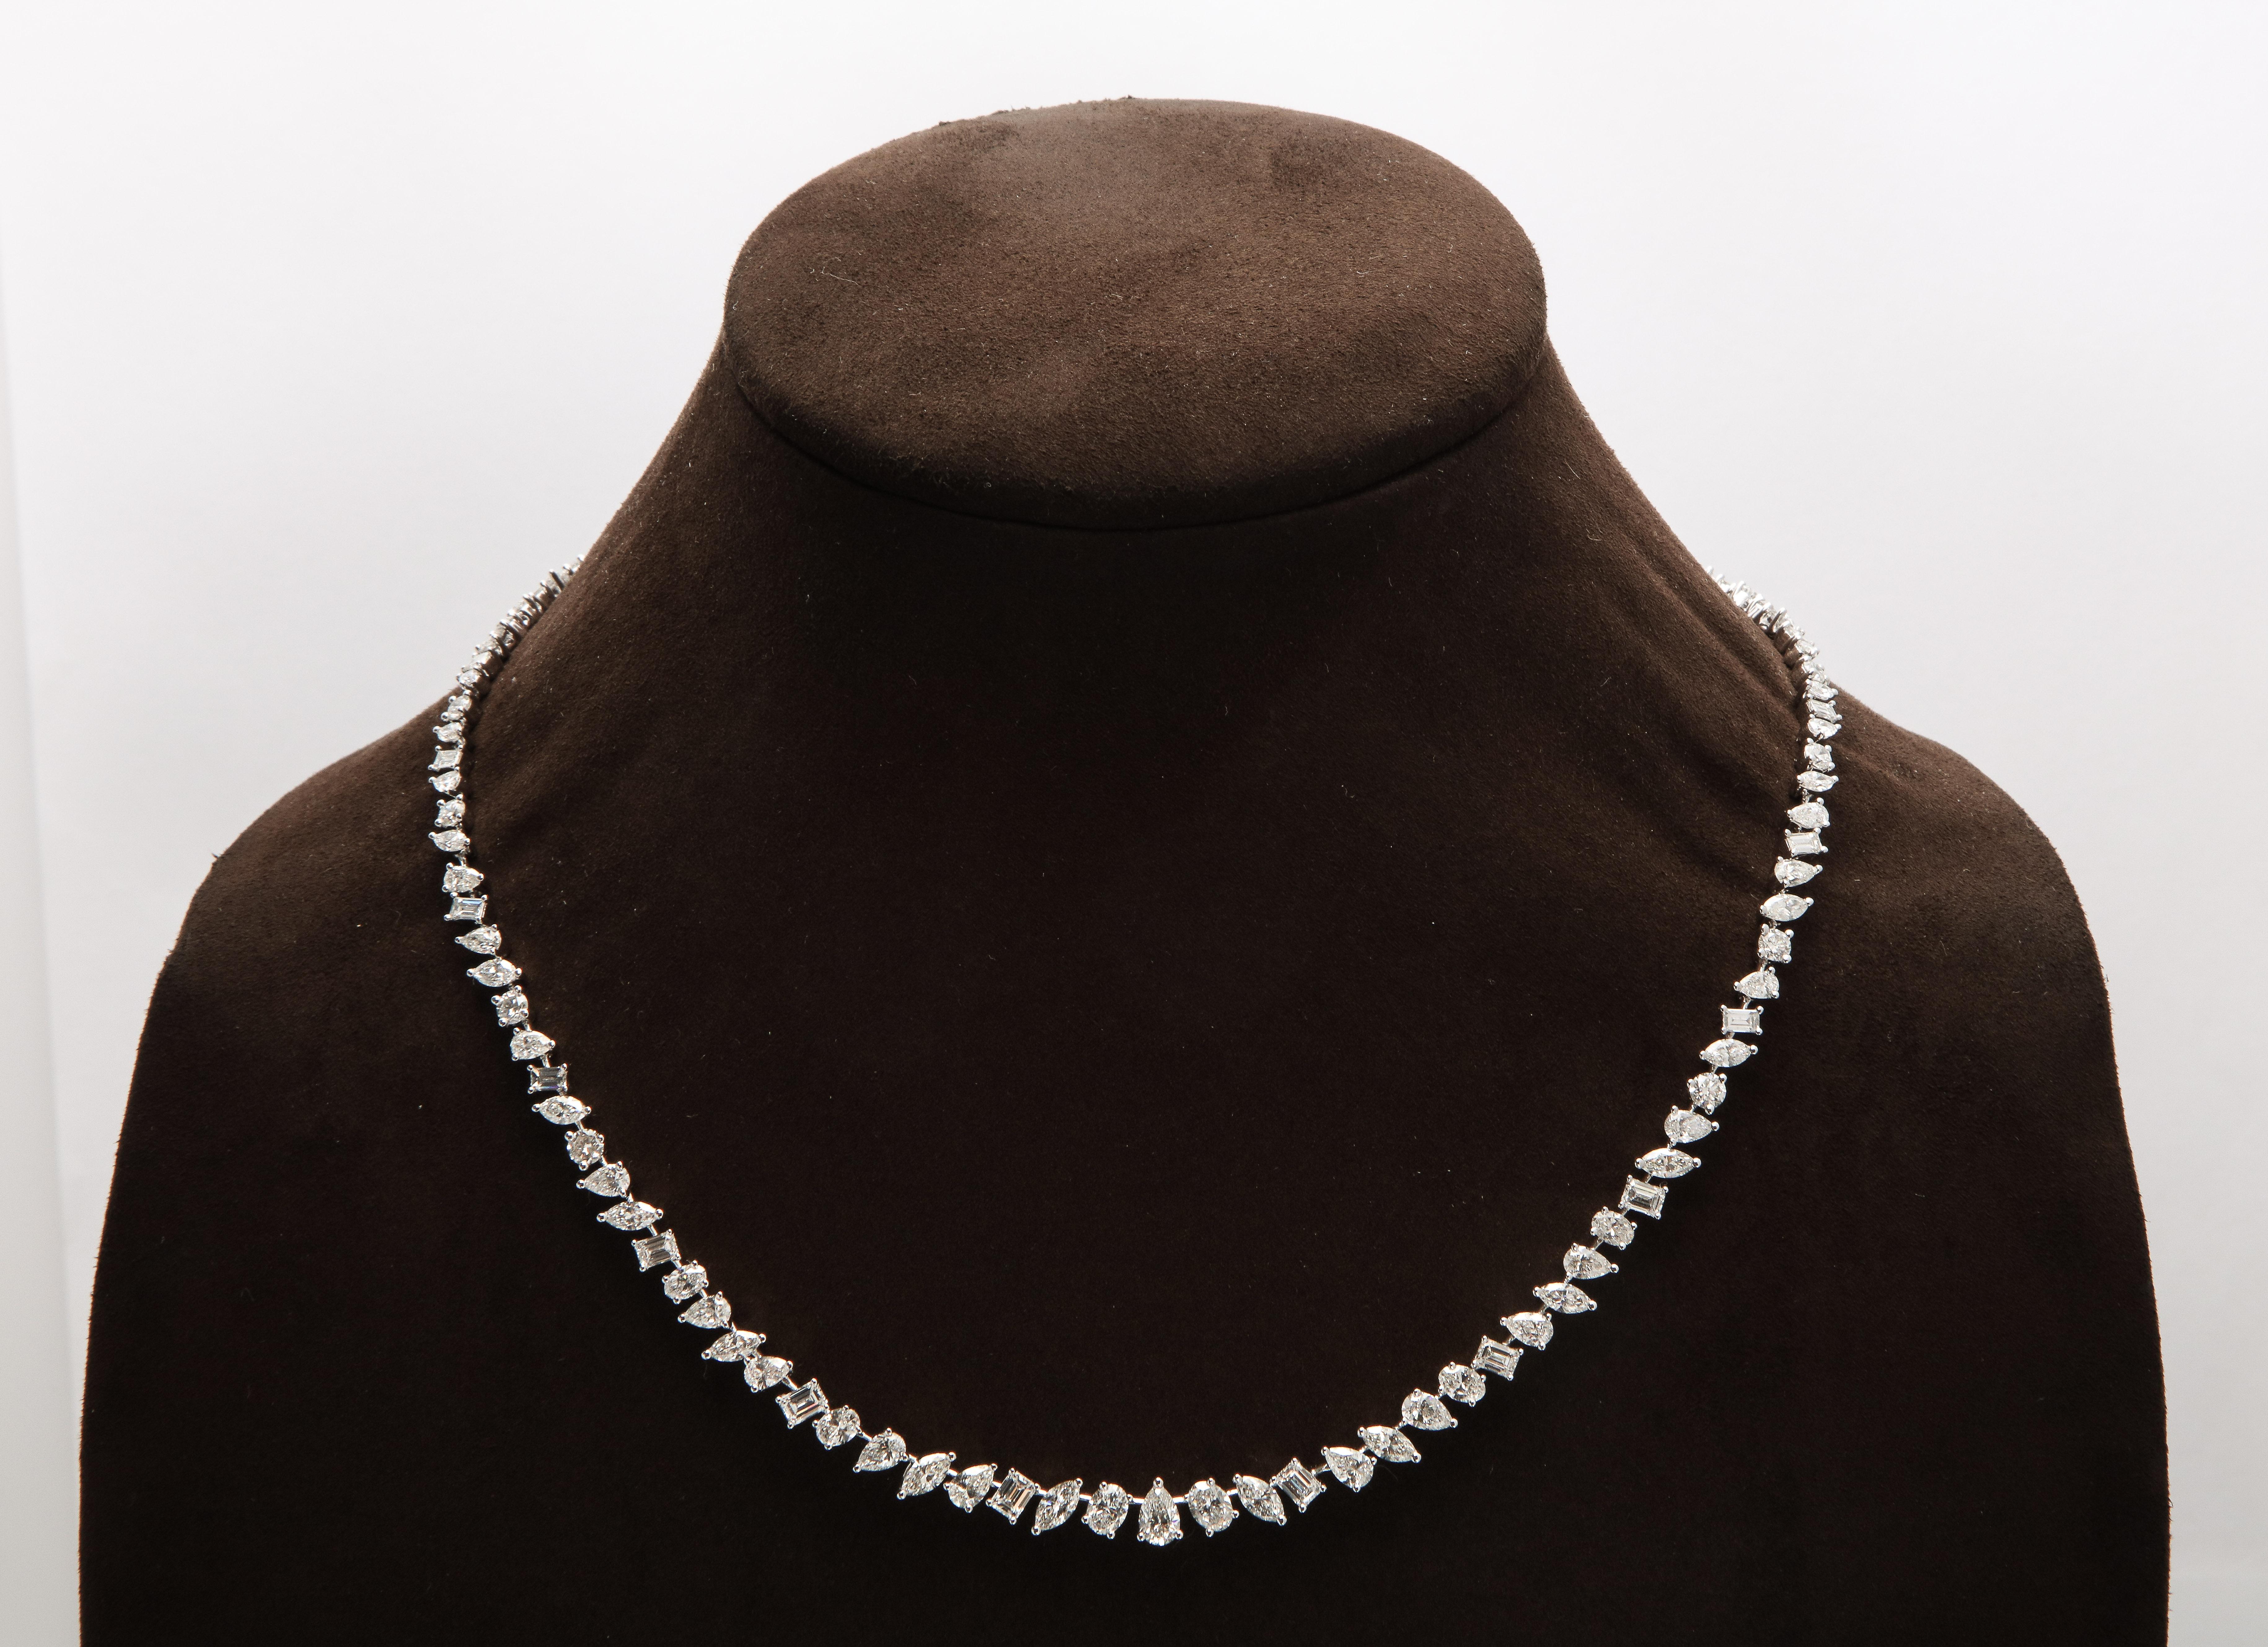 
A unique diamond necklace.

17.20 carats of oval, pear, emerald, marquise and round cut white diamonds set in 18k white gold. 

16 inch length with a removable piece to wear at 15 inches. 

This necklace can be dressed up or down, perfect for a